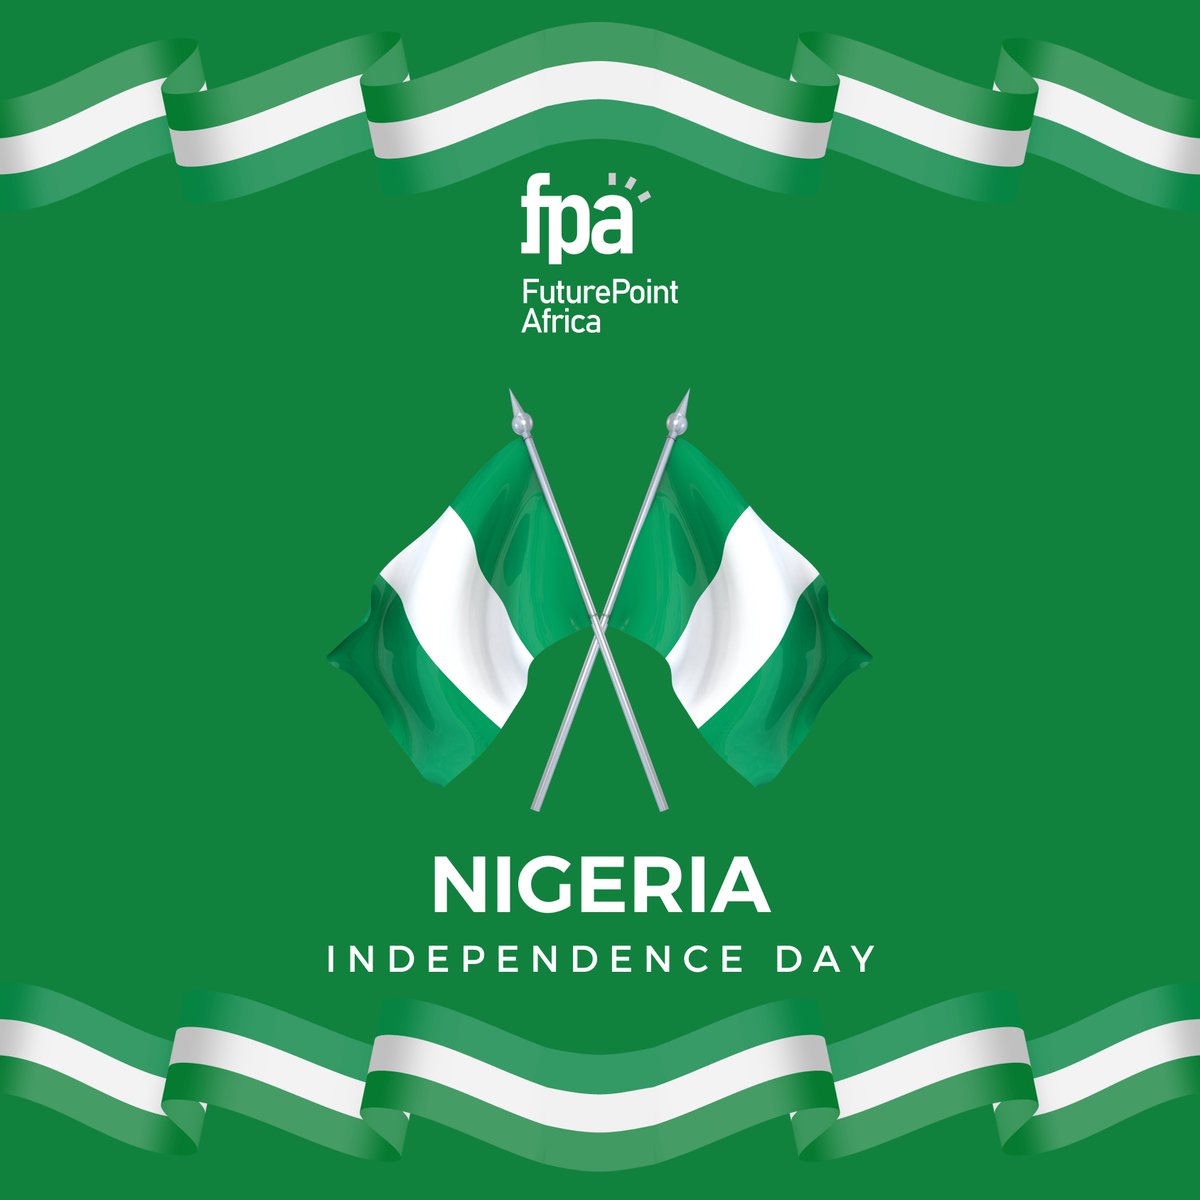 Happy Independence Day, Nigeria! 🇳🇬

At FuturePoint Africa, we are proud to be part of Nigeria's story, contributing to the development of Africa’s most populous nation.

Let's continue to empower our young people, and shape a brighter future for Nigeria and the rest of Africa.